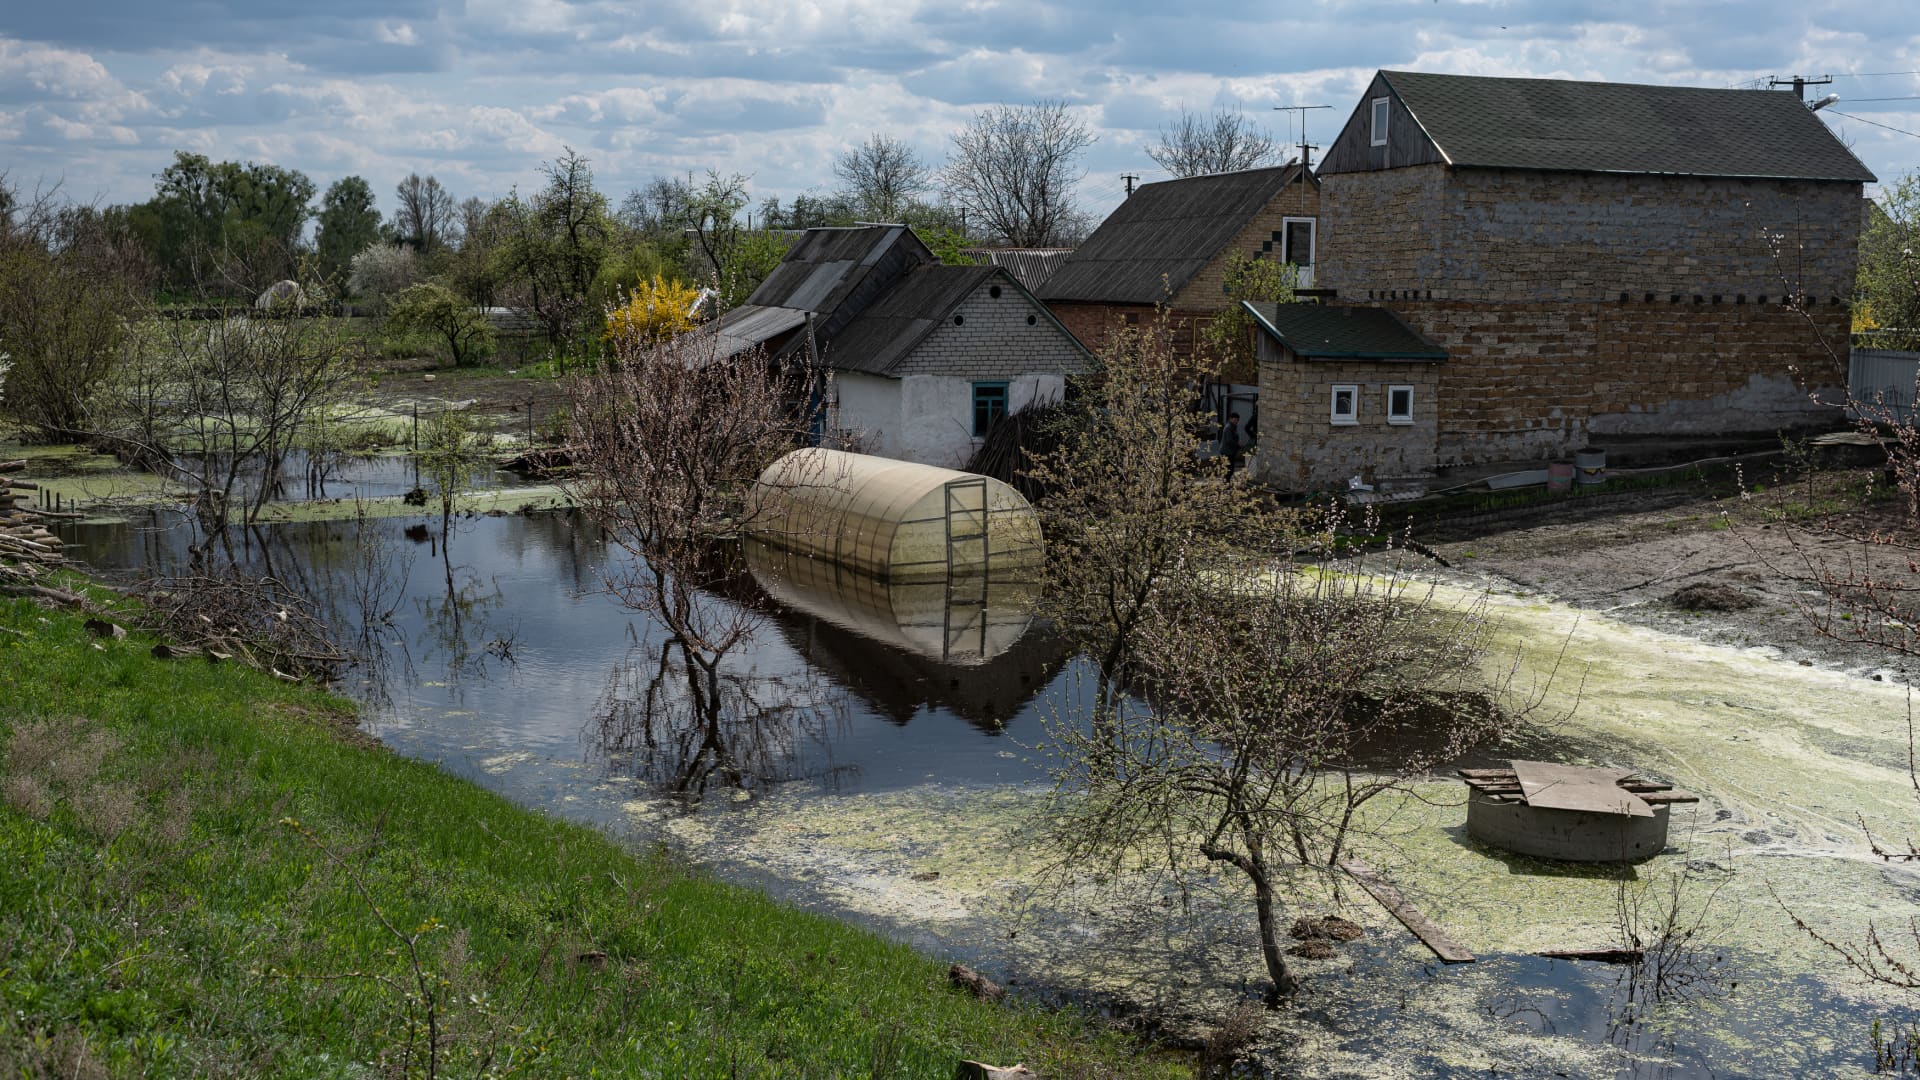 A flooded garden, on May 2, 2022 in Demydiv, Ukraine. To keep Russian armoured columns at bay, Ukrainian forces released water from a nearby hydroelectric dam to intentionally flood Demydiv, a village north of Kyiv.